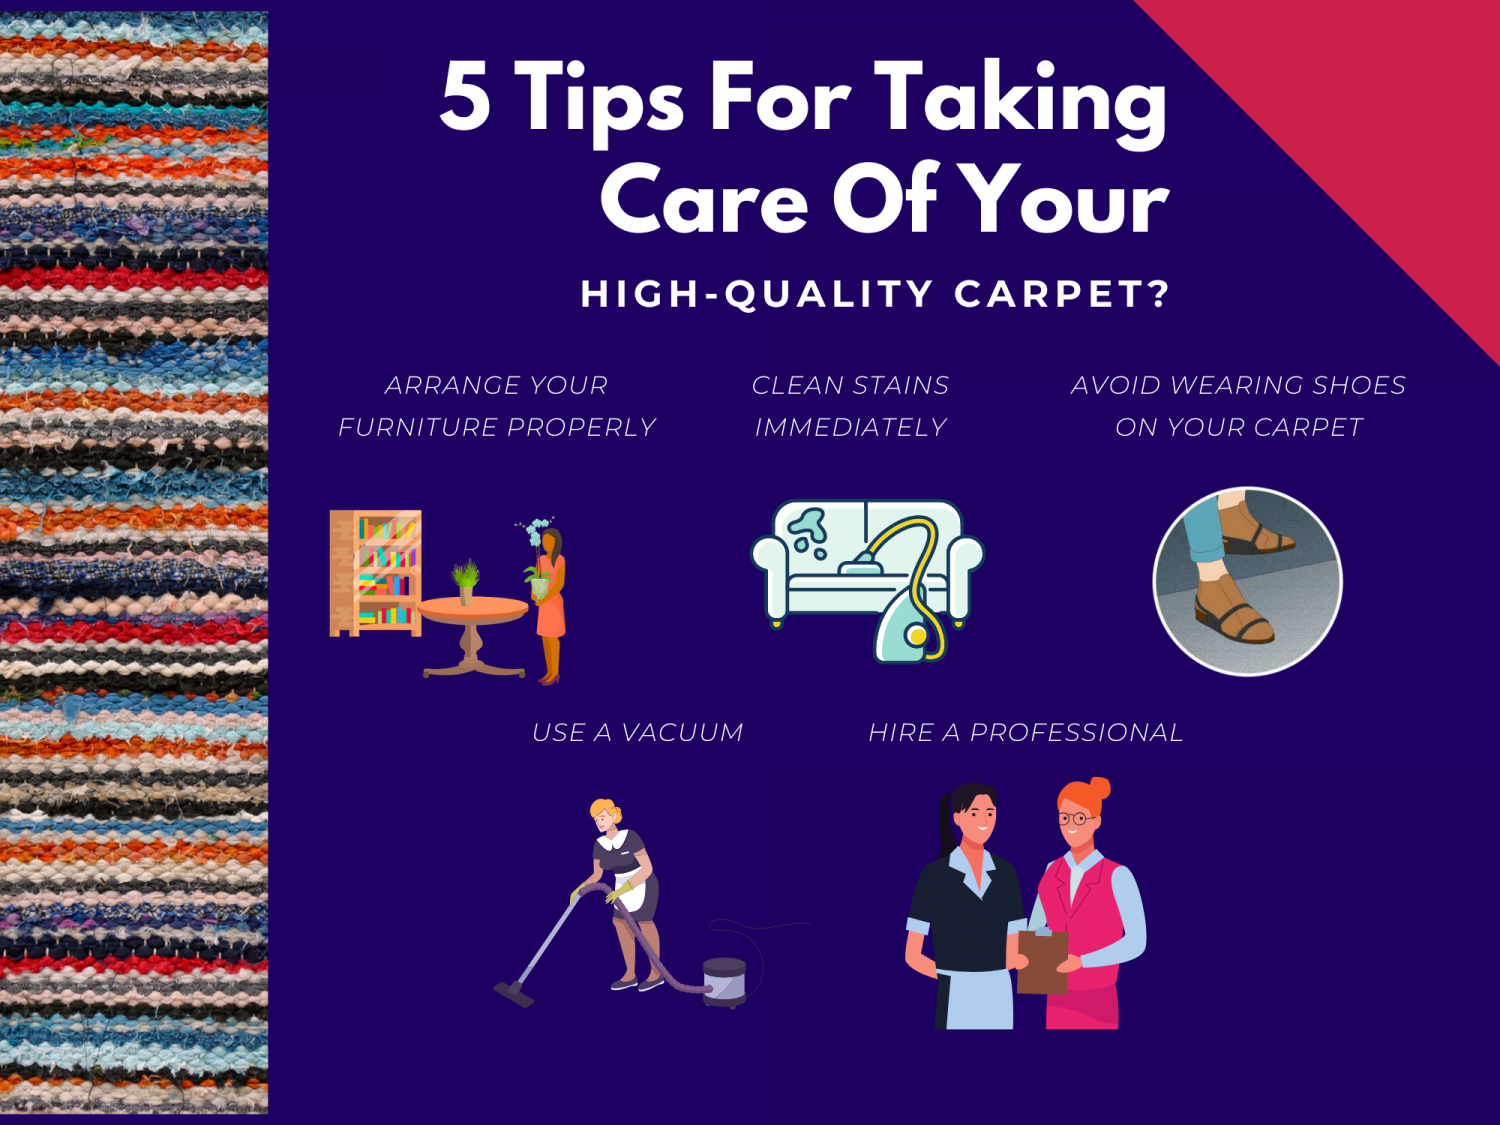 5 Tips For Taking Care Of Your High-Quality Carpet Infographic